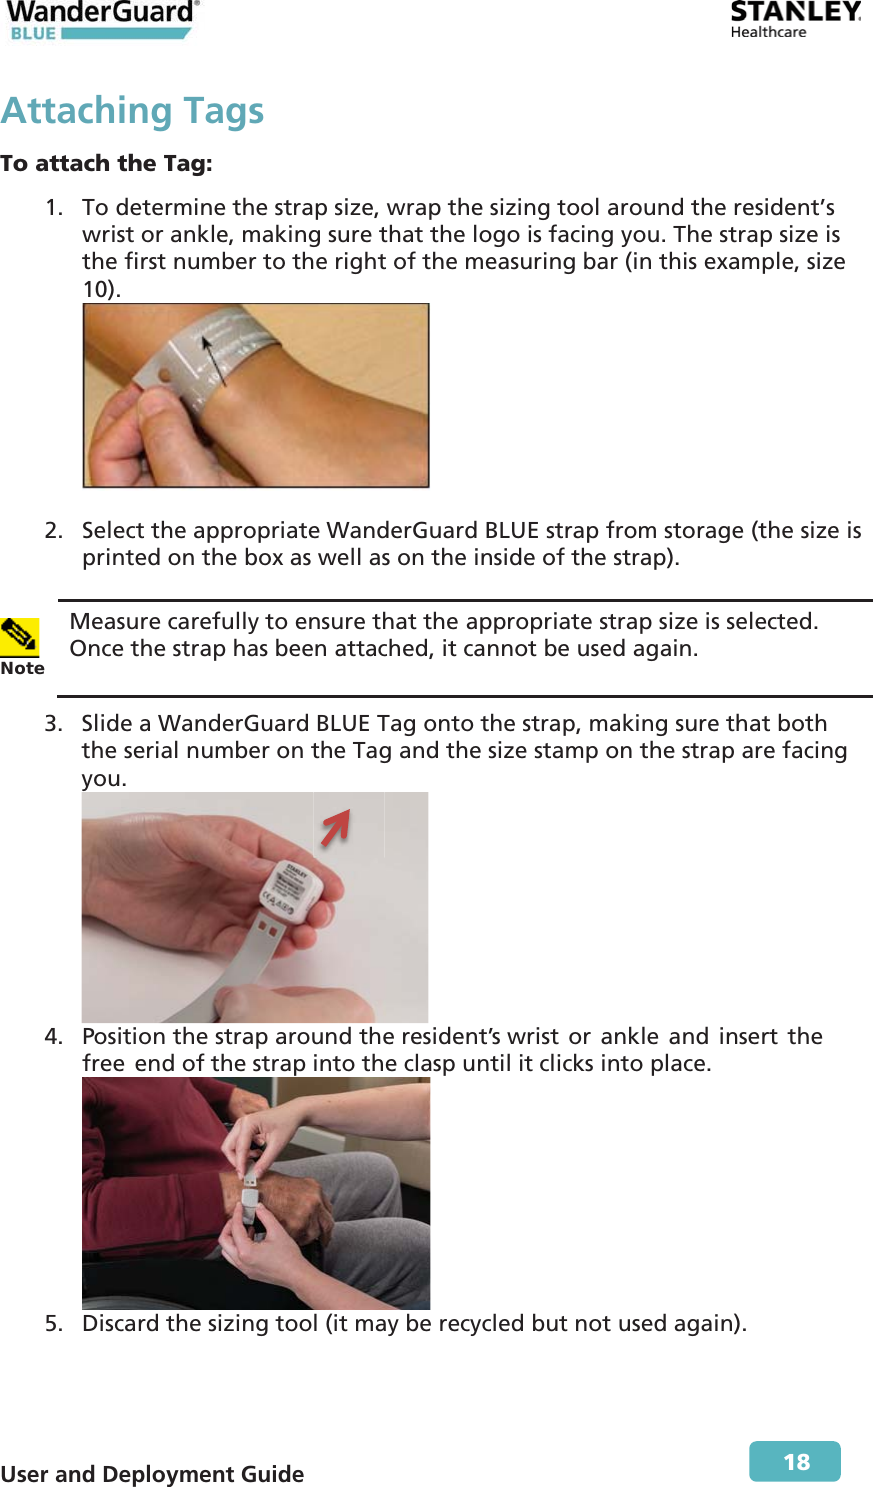  User and Deployment Guide        18 Attaching TagsTo attach the Tag: 1. To determine the strap size, wrap the sizing tool around the resident’s wrist or ankle, making sure that the logo is facing you. The strap size is the first number to the right of the measuring bar (in this example, size 10).   2. Select the appropriate WanderGuard BLUE strap from storage (the size is printed on the box as well as on the inside of the strap).   Note Measure carefully to ensure that the appropriate strap size is selected. Once the strap has been attached, it cannot be used again. 3. Slide a WanderGuard BLUE Tag onto the strap, making sure that both the serial number on the Tag and the size stamp on the strap are facing you.  4. Position the strap around the resident’s wrist or ankle and insert the free end of the strap into the clasp until it clicks into place.  5. Discard the sizing tool (it may be recycled but not used again). 